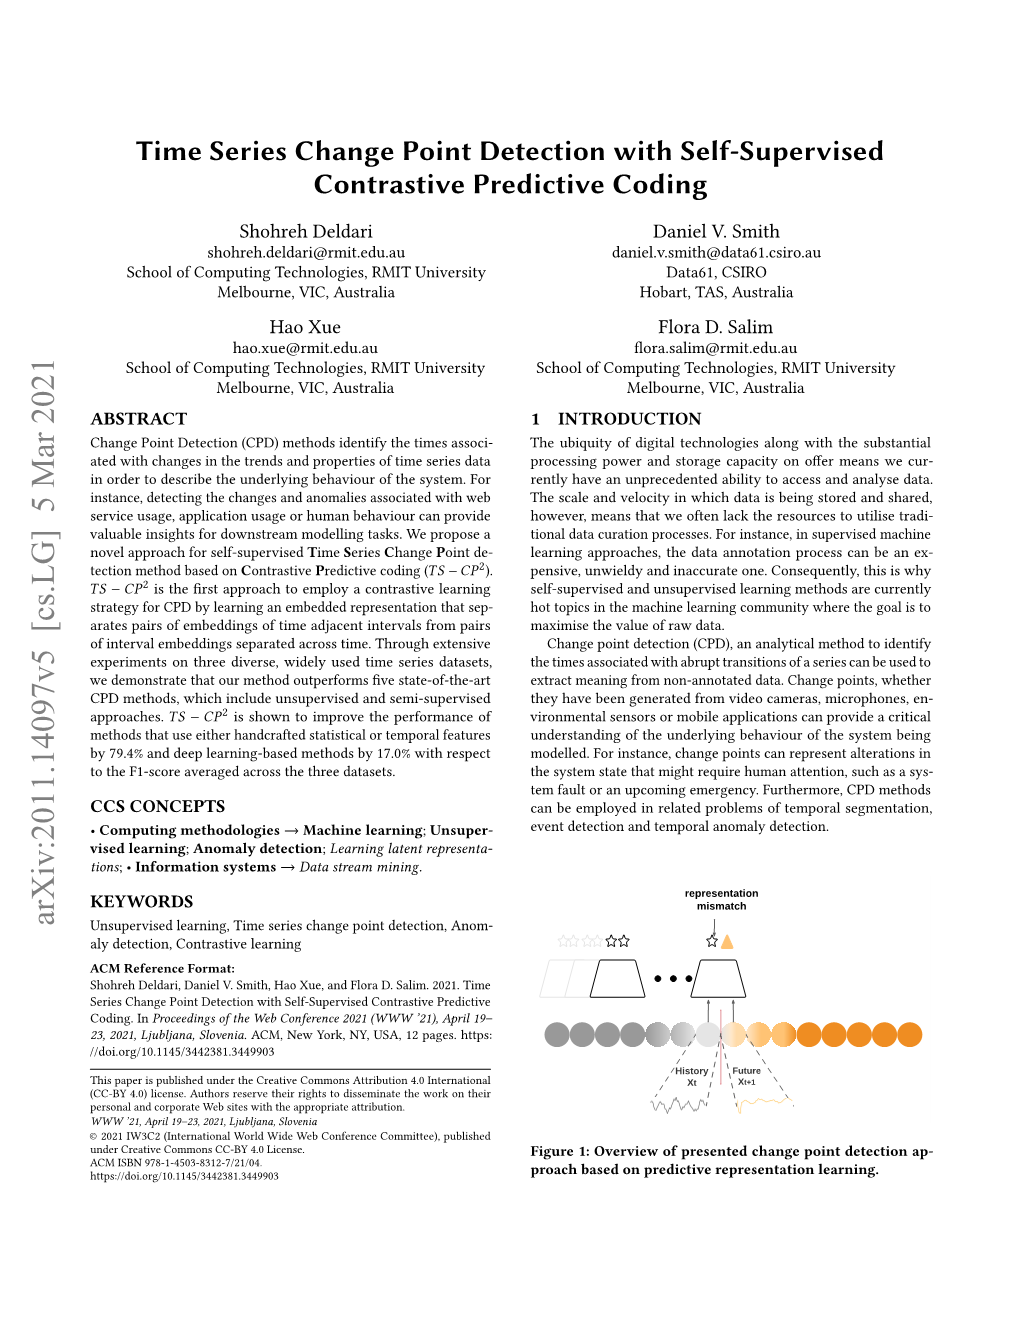 Time Series Change Point Detection with Self-Supervised Contrastive Predictive Coding